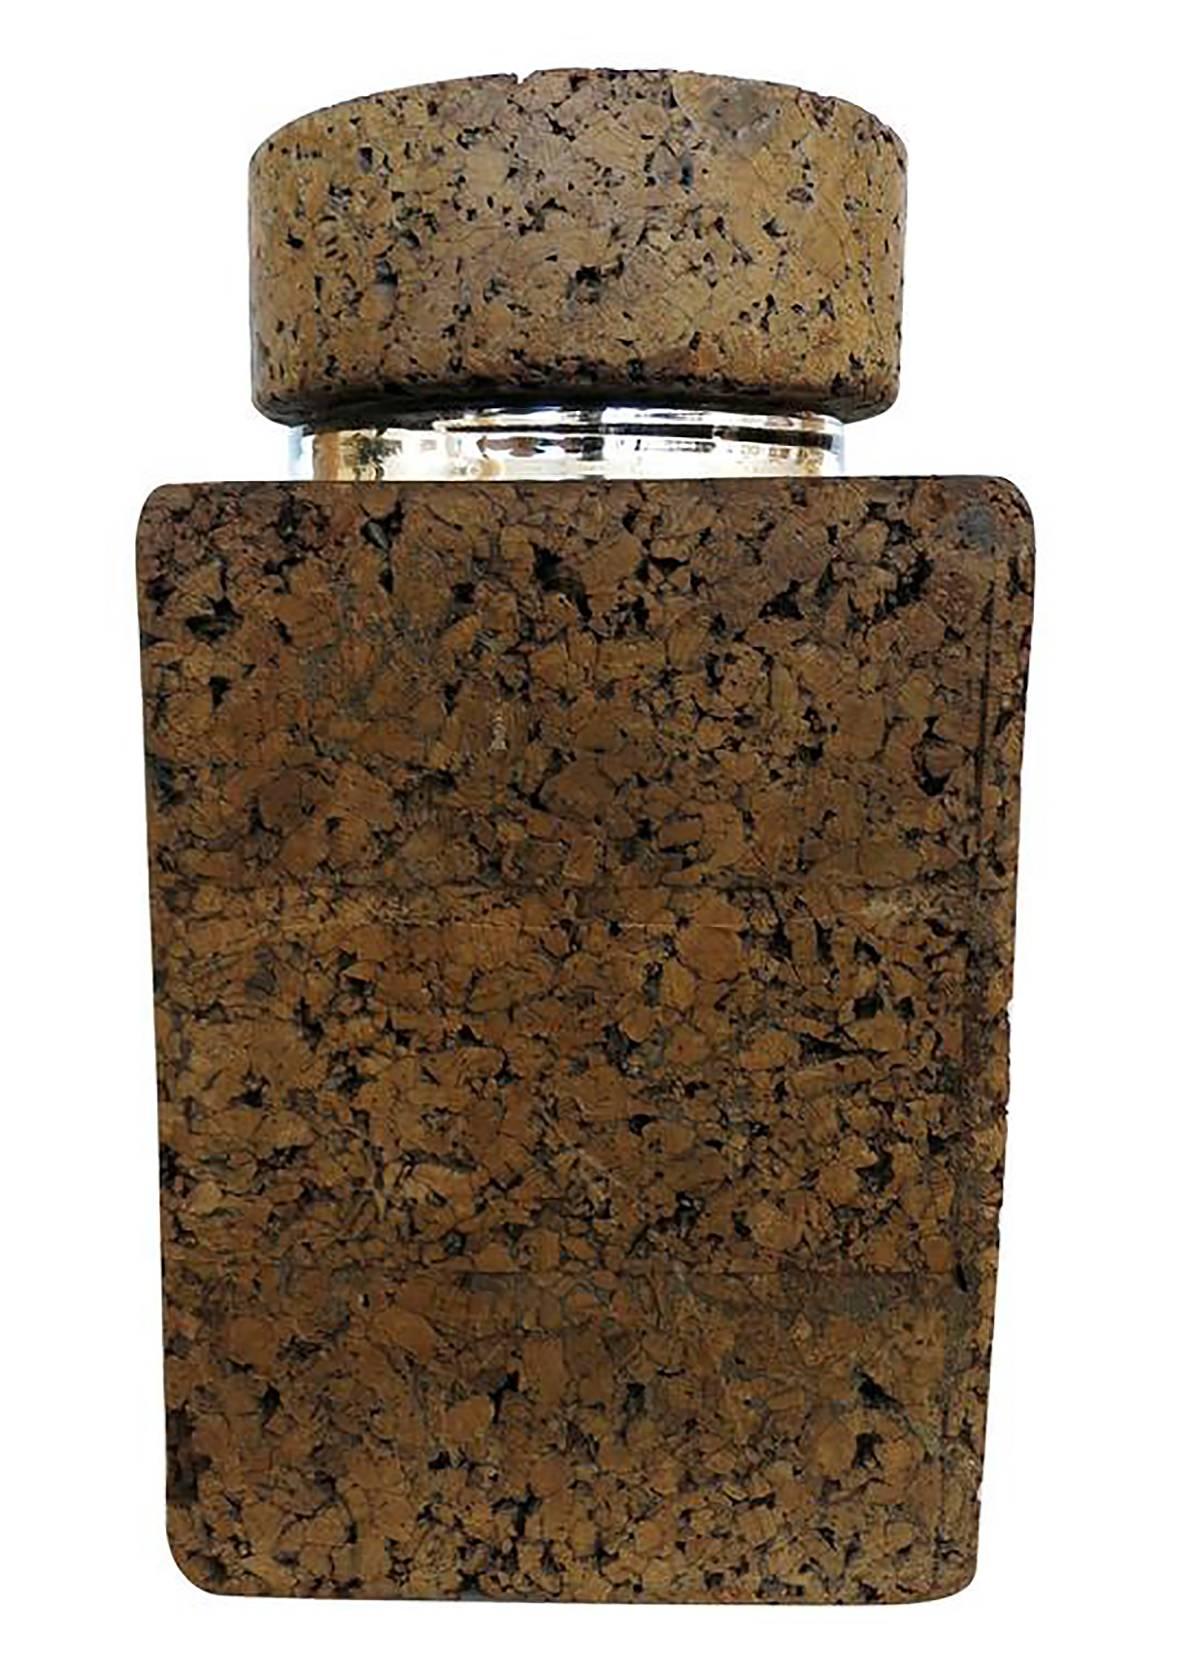 Large Mid-century oversized cork jar largely inspired by the works of Milo Baughman and Paul Frankl.

This large square shaped jar features a large piece of sculpted cork with a mirrored glass cylinder in the centre. Comes with original cork lid.